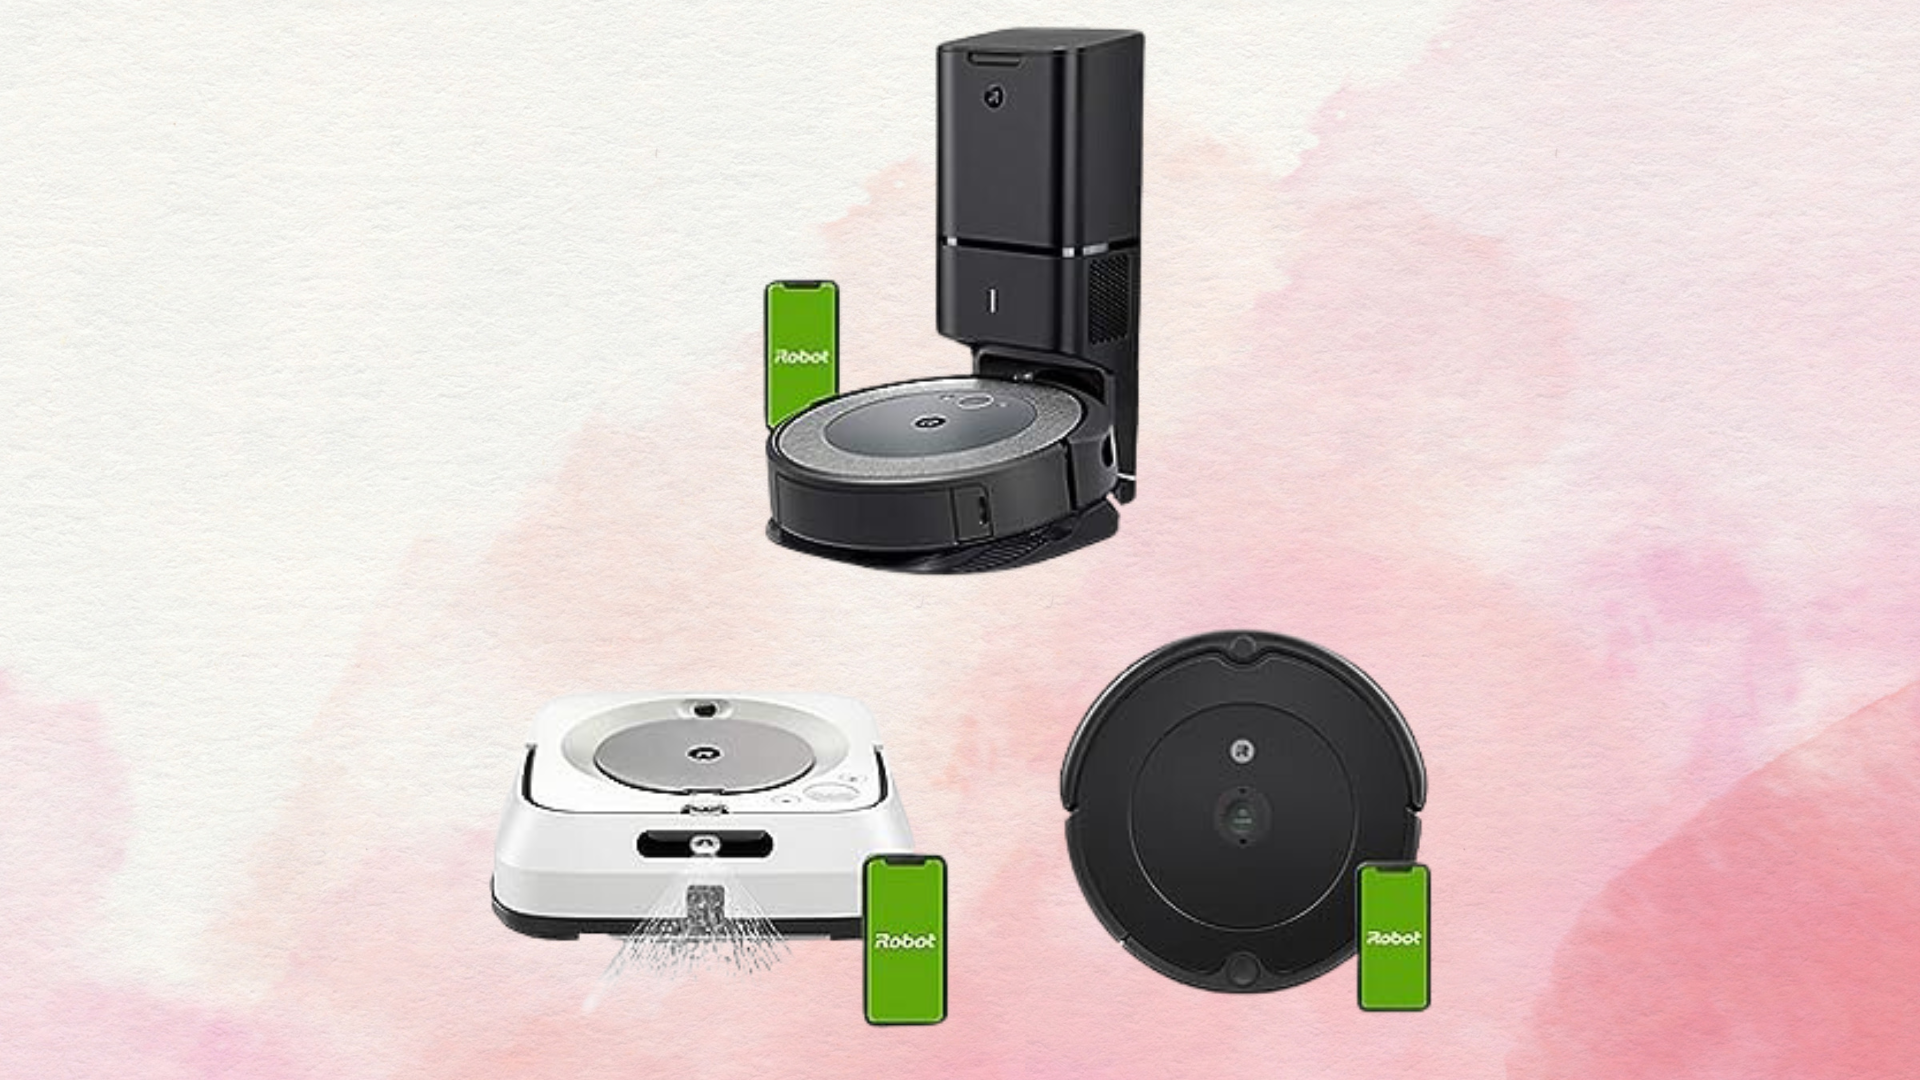 iRobot Roomba Vacuums against a pink background